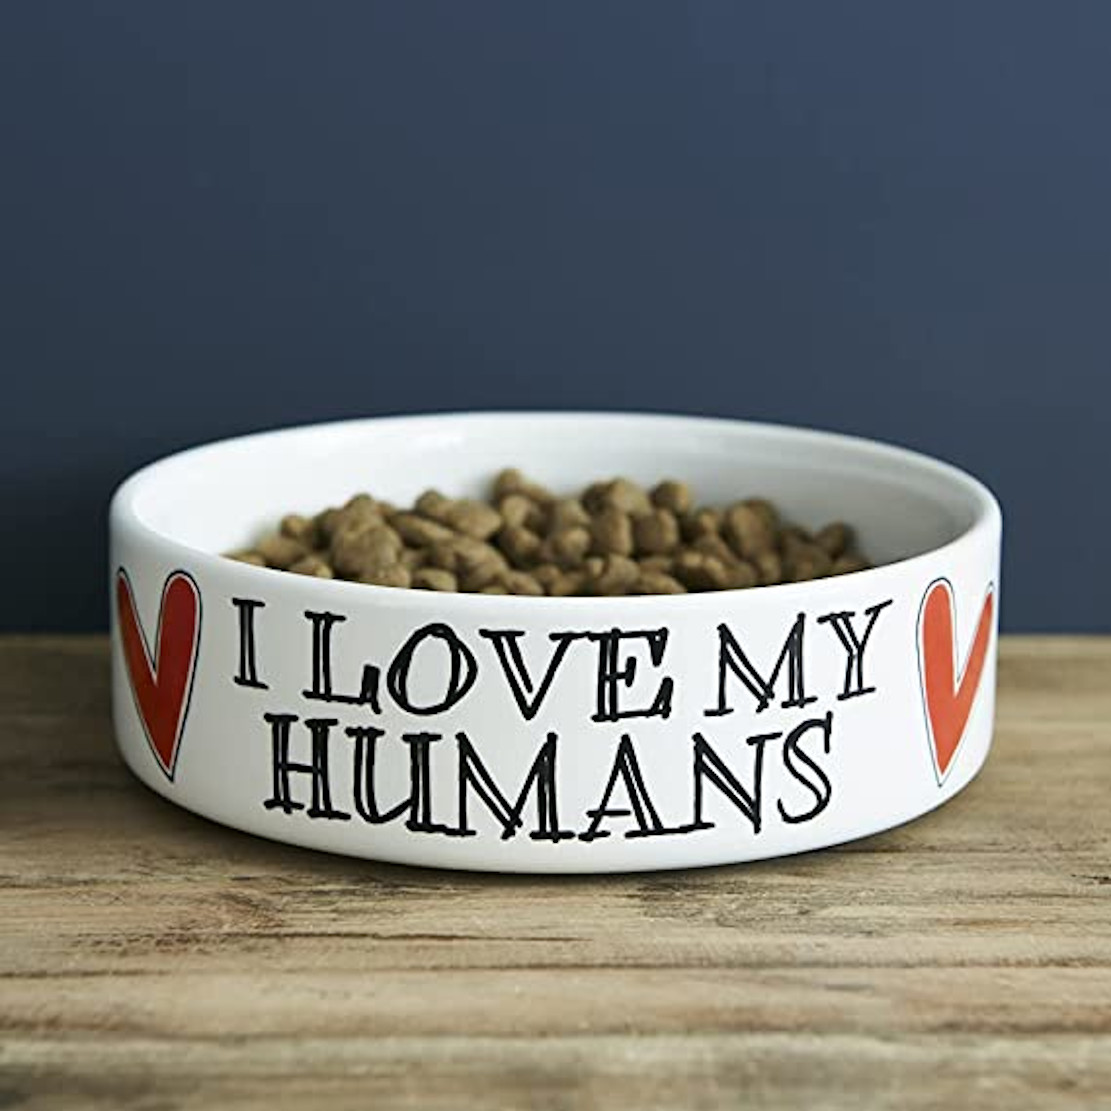 Sweet William I Love My Humans - Small Dog Bowl